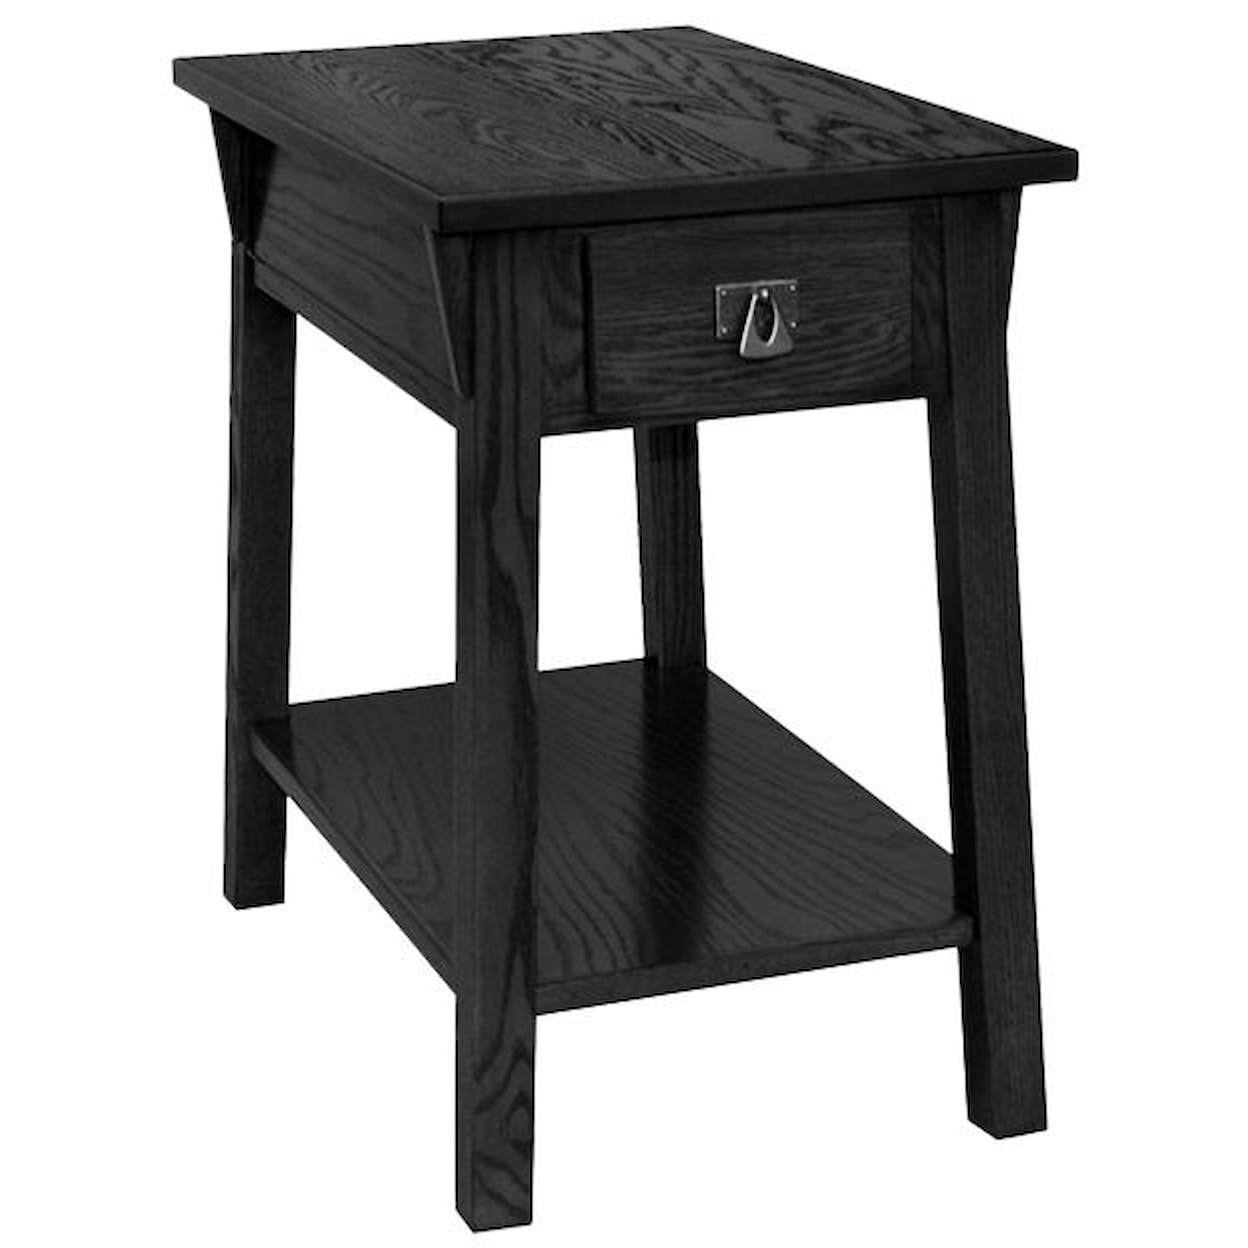 Leick Furniture Favorite Finds Mission Chairside Table